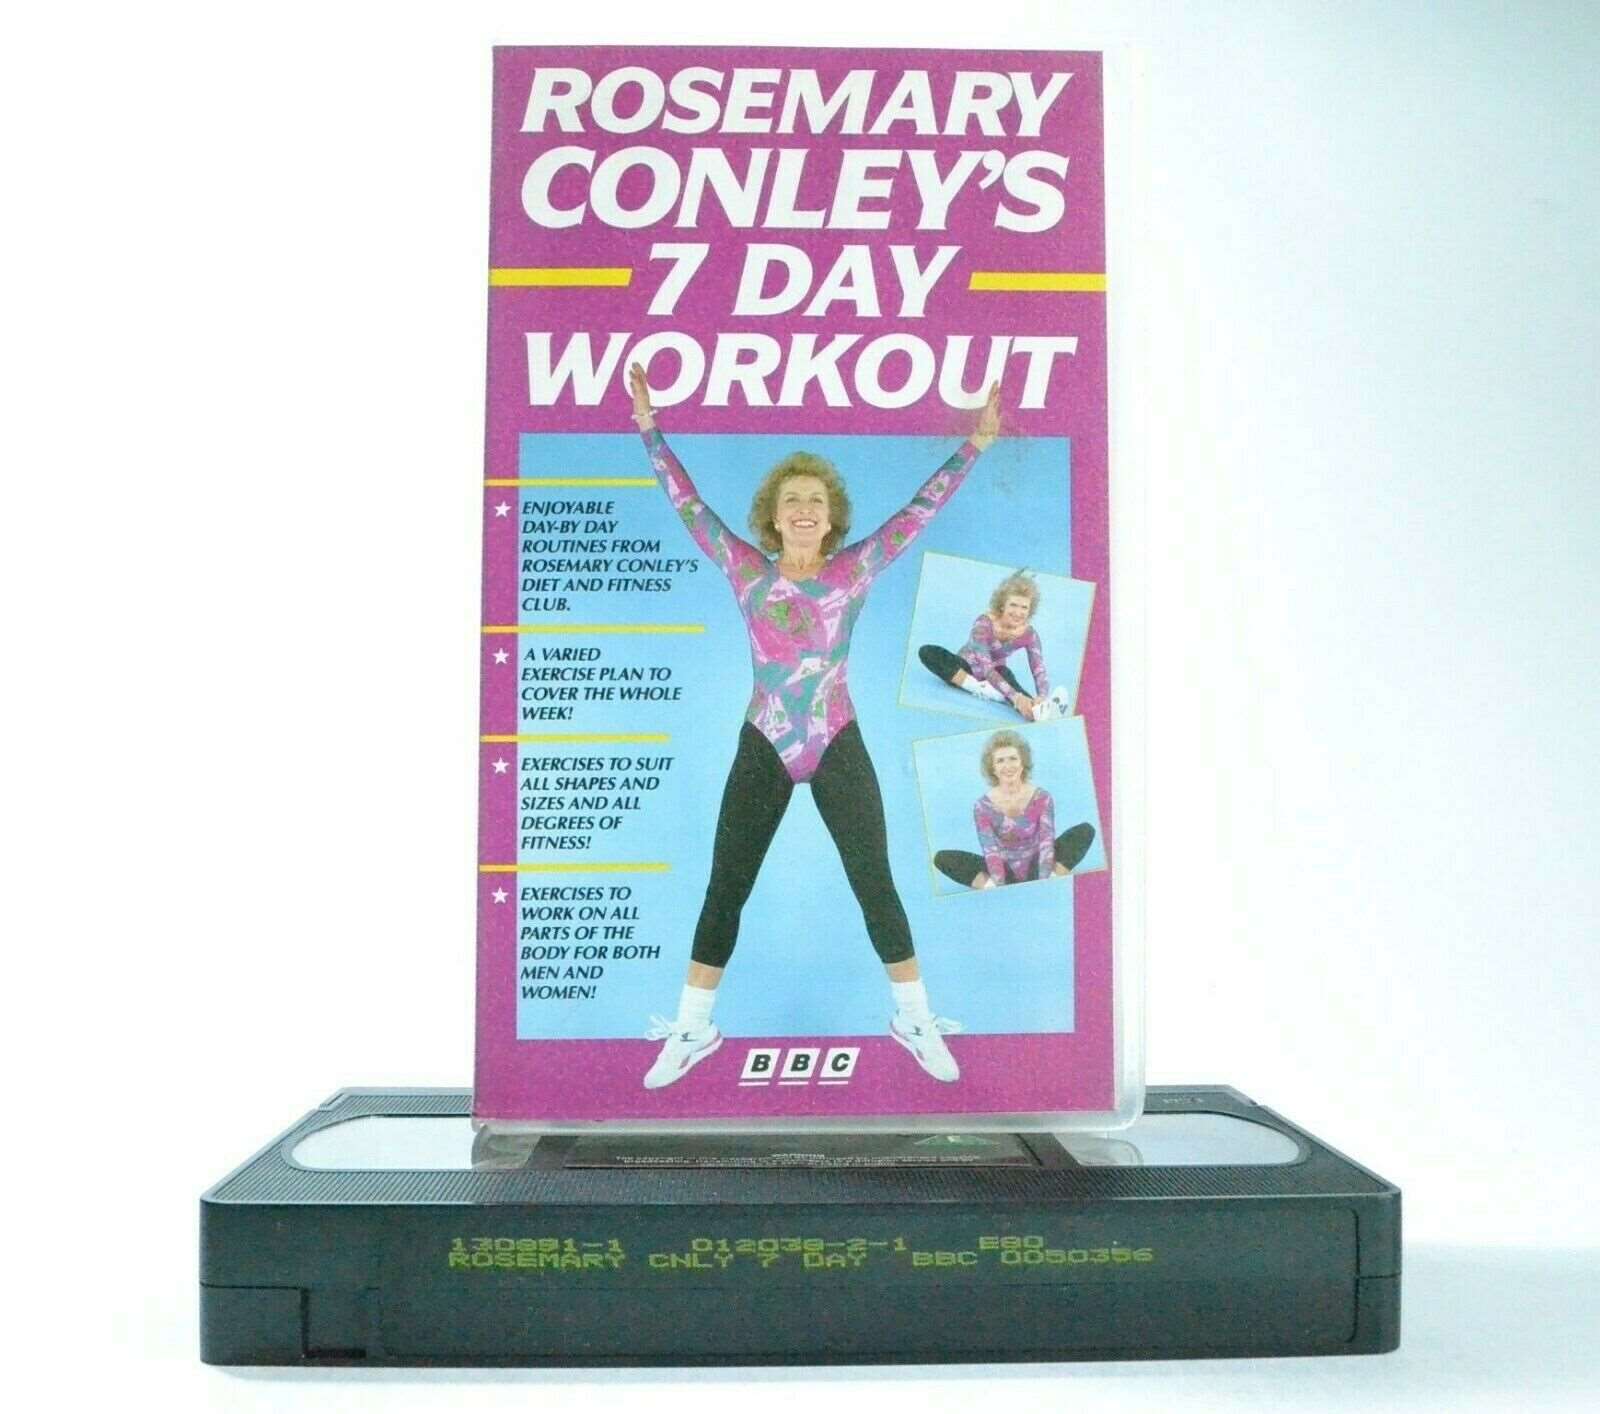 7 Day Workout: By Rosemary Conley - Exercises - Body Transformation - Pal VHS-